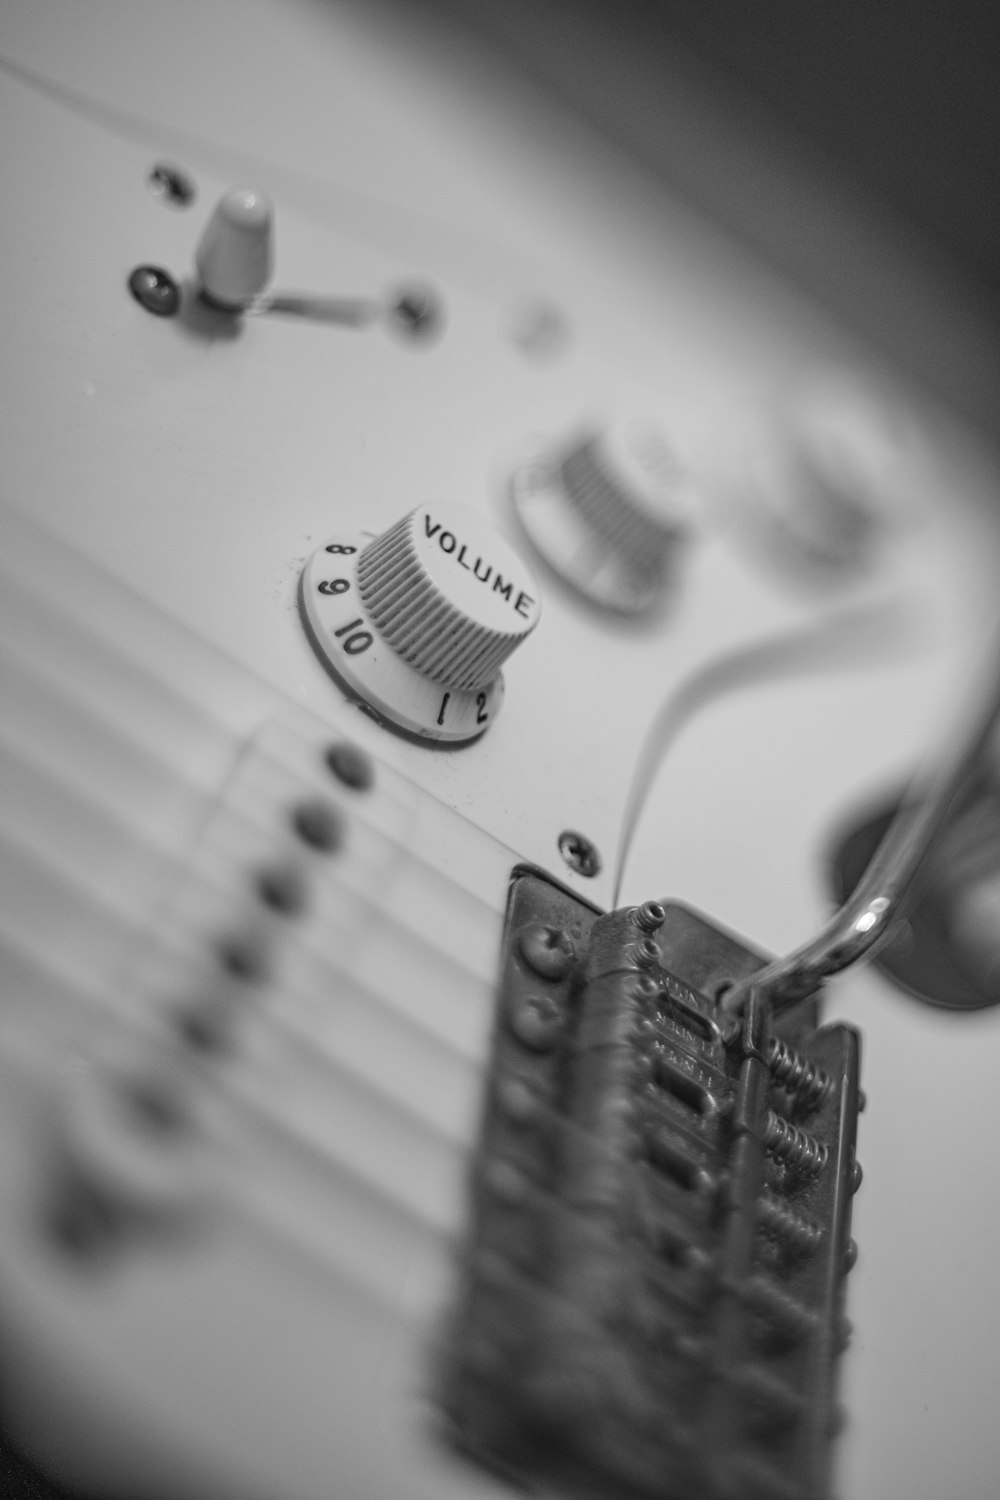 a close up of an electric guitar's neck